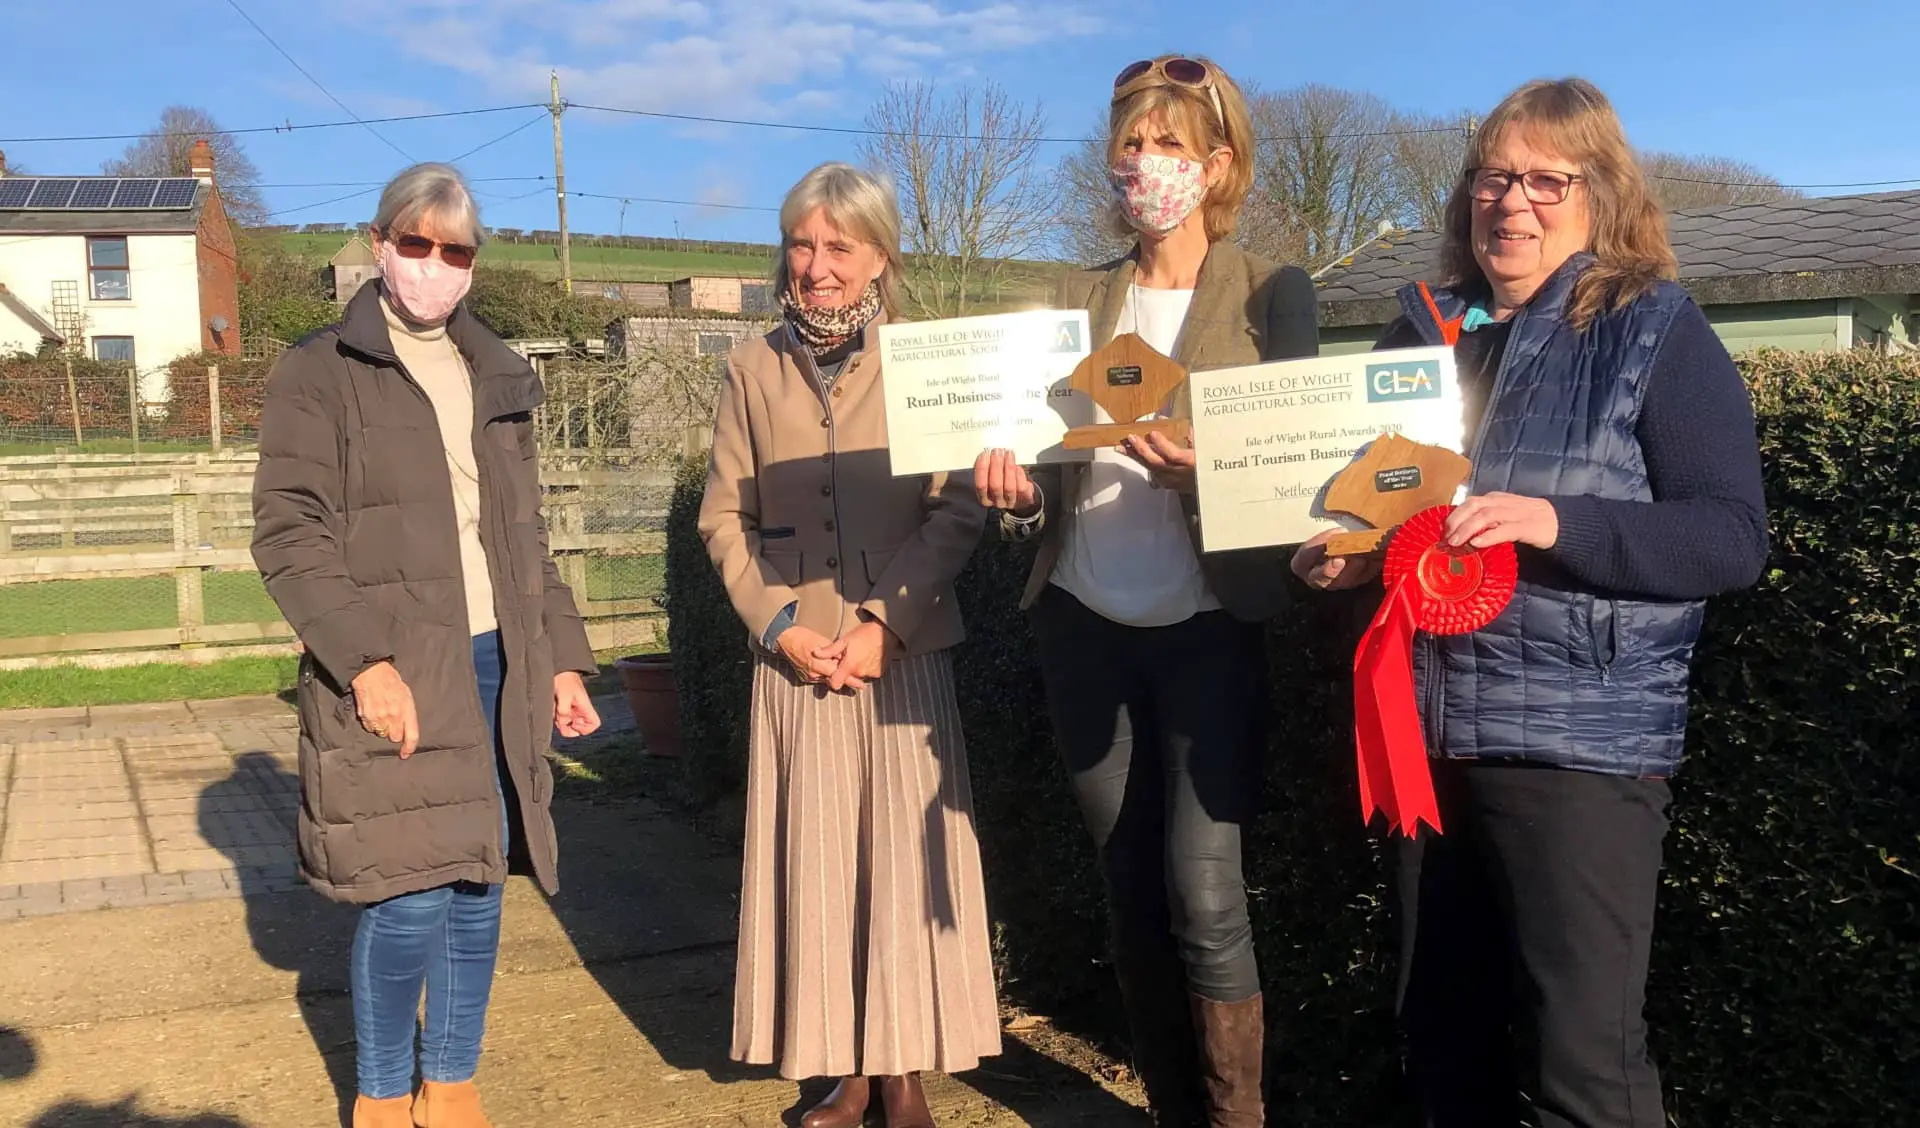 Nettlecombe Farm IOW awards 2020 - four people standing in farm yard with award certificates